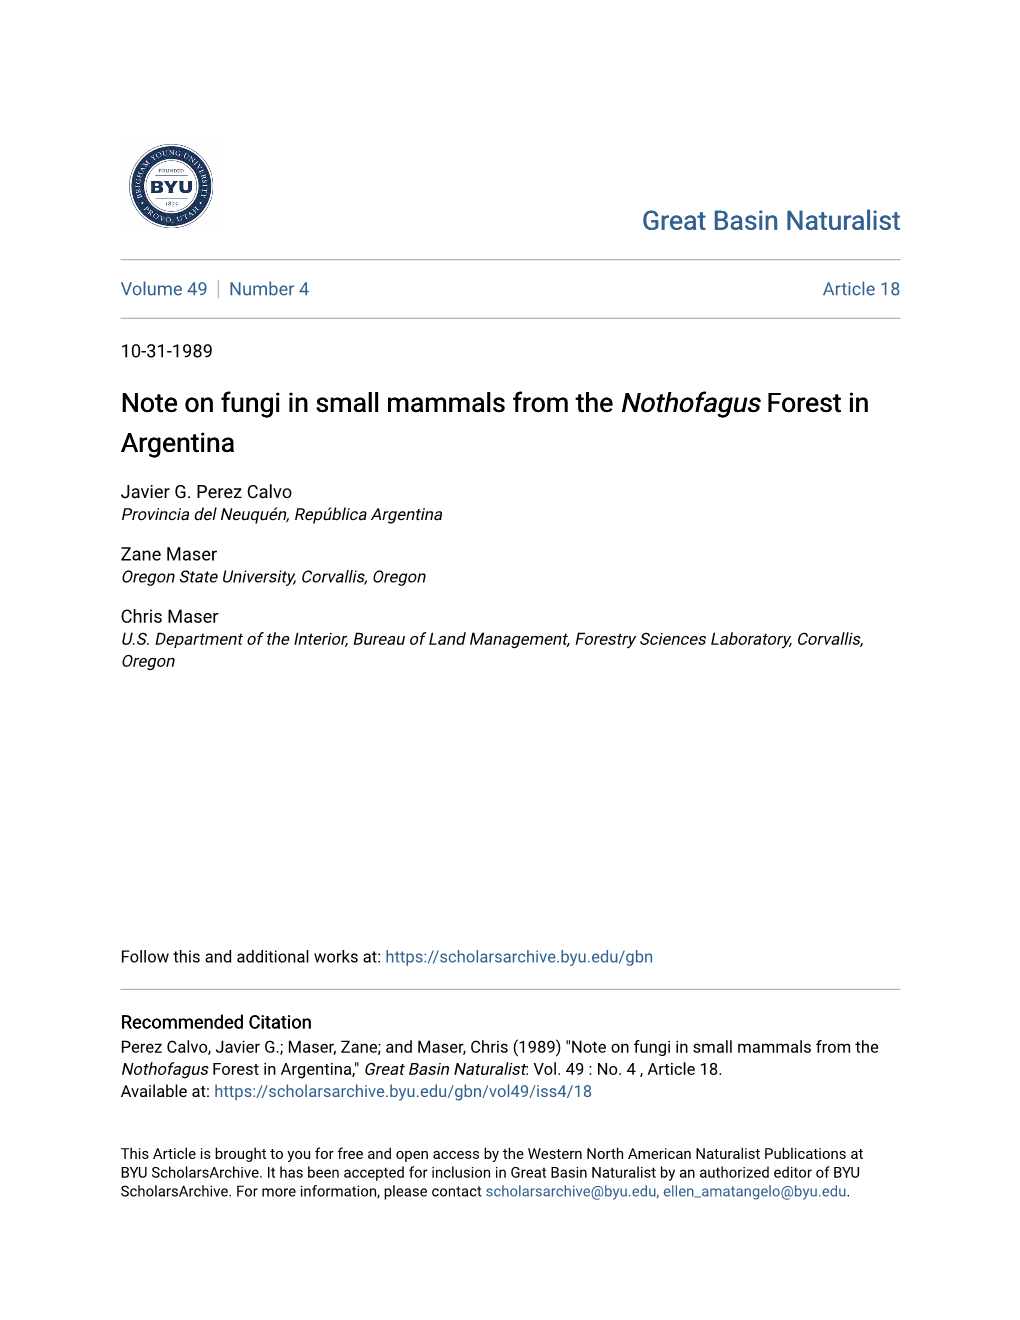 Note on Fungi in Small Mammals from the Nothofagus Forest in Argentina